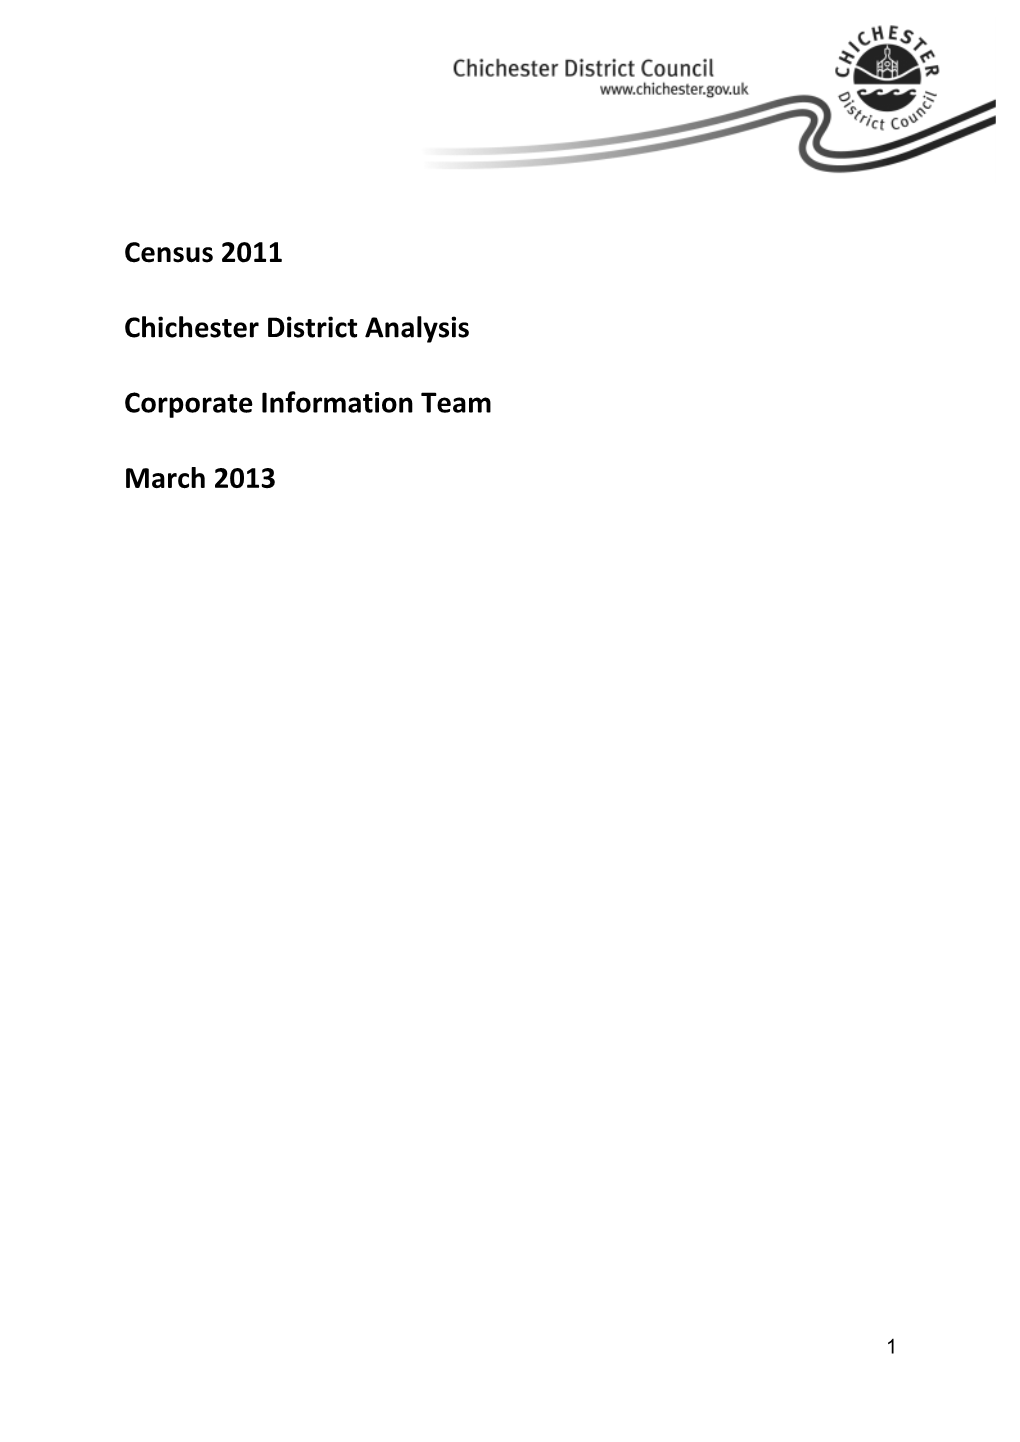 Census 2011 Chichester District Analysis Corporate Information